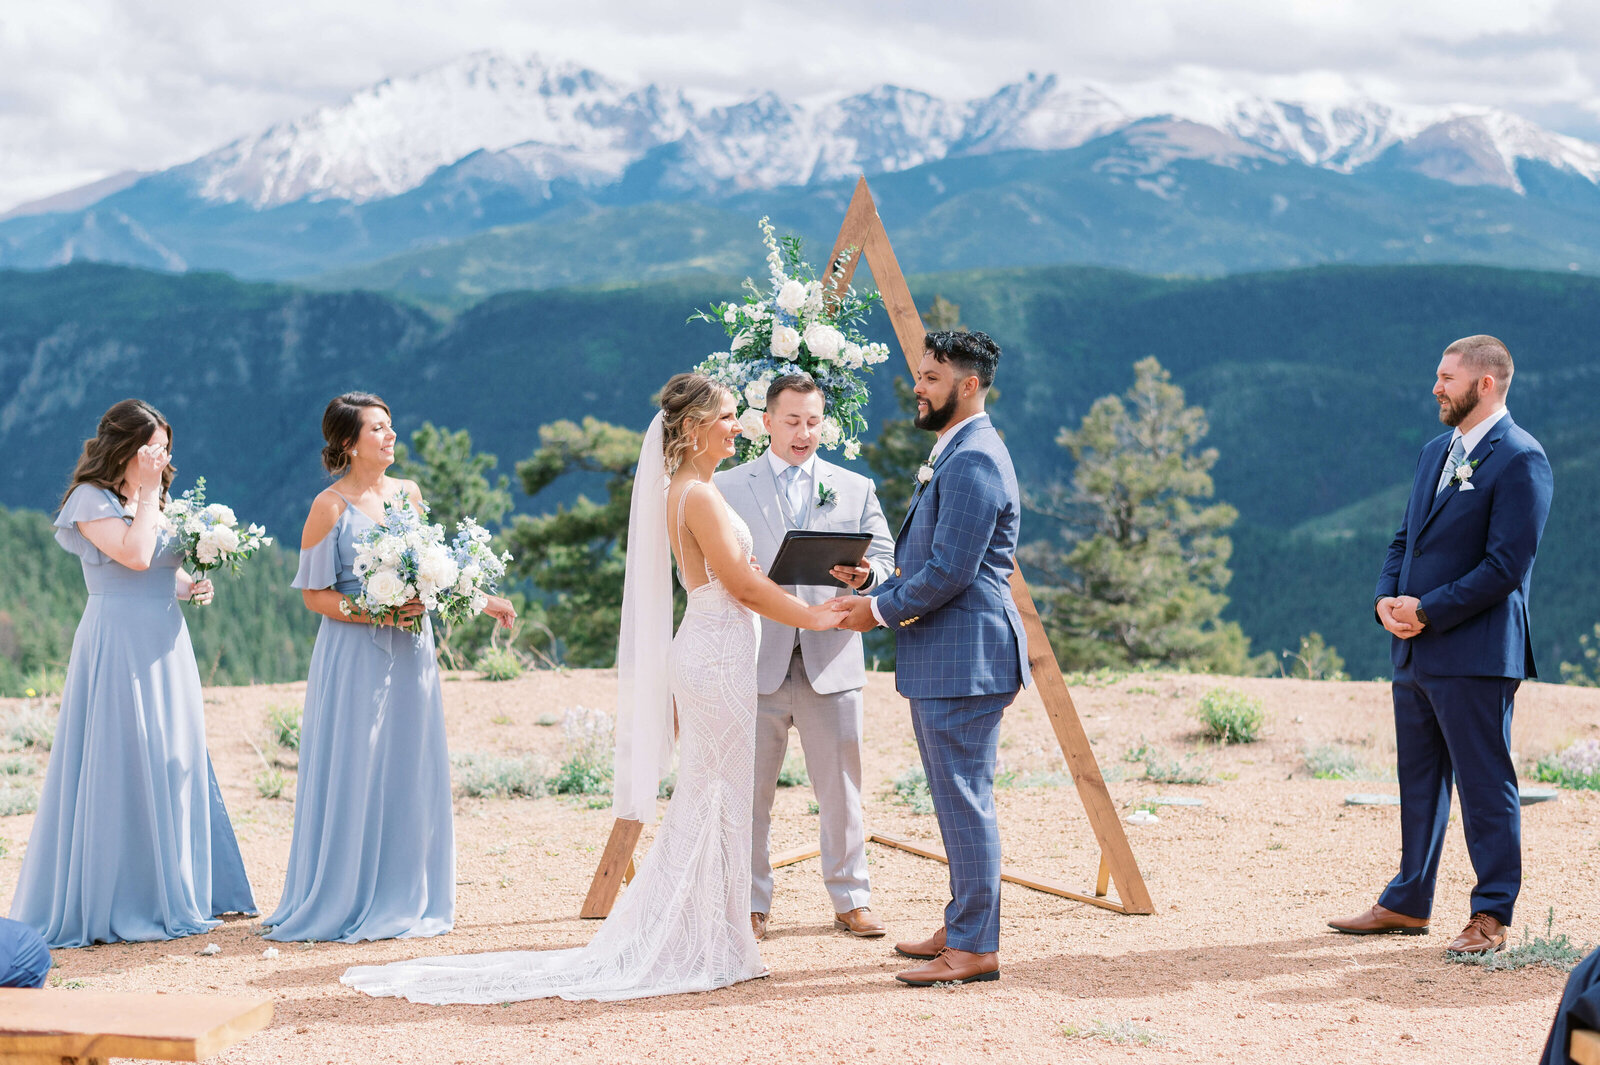 A beautiful wedding ceremony in front of the mountains during summer